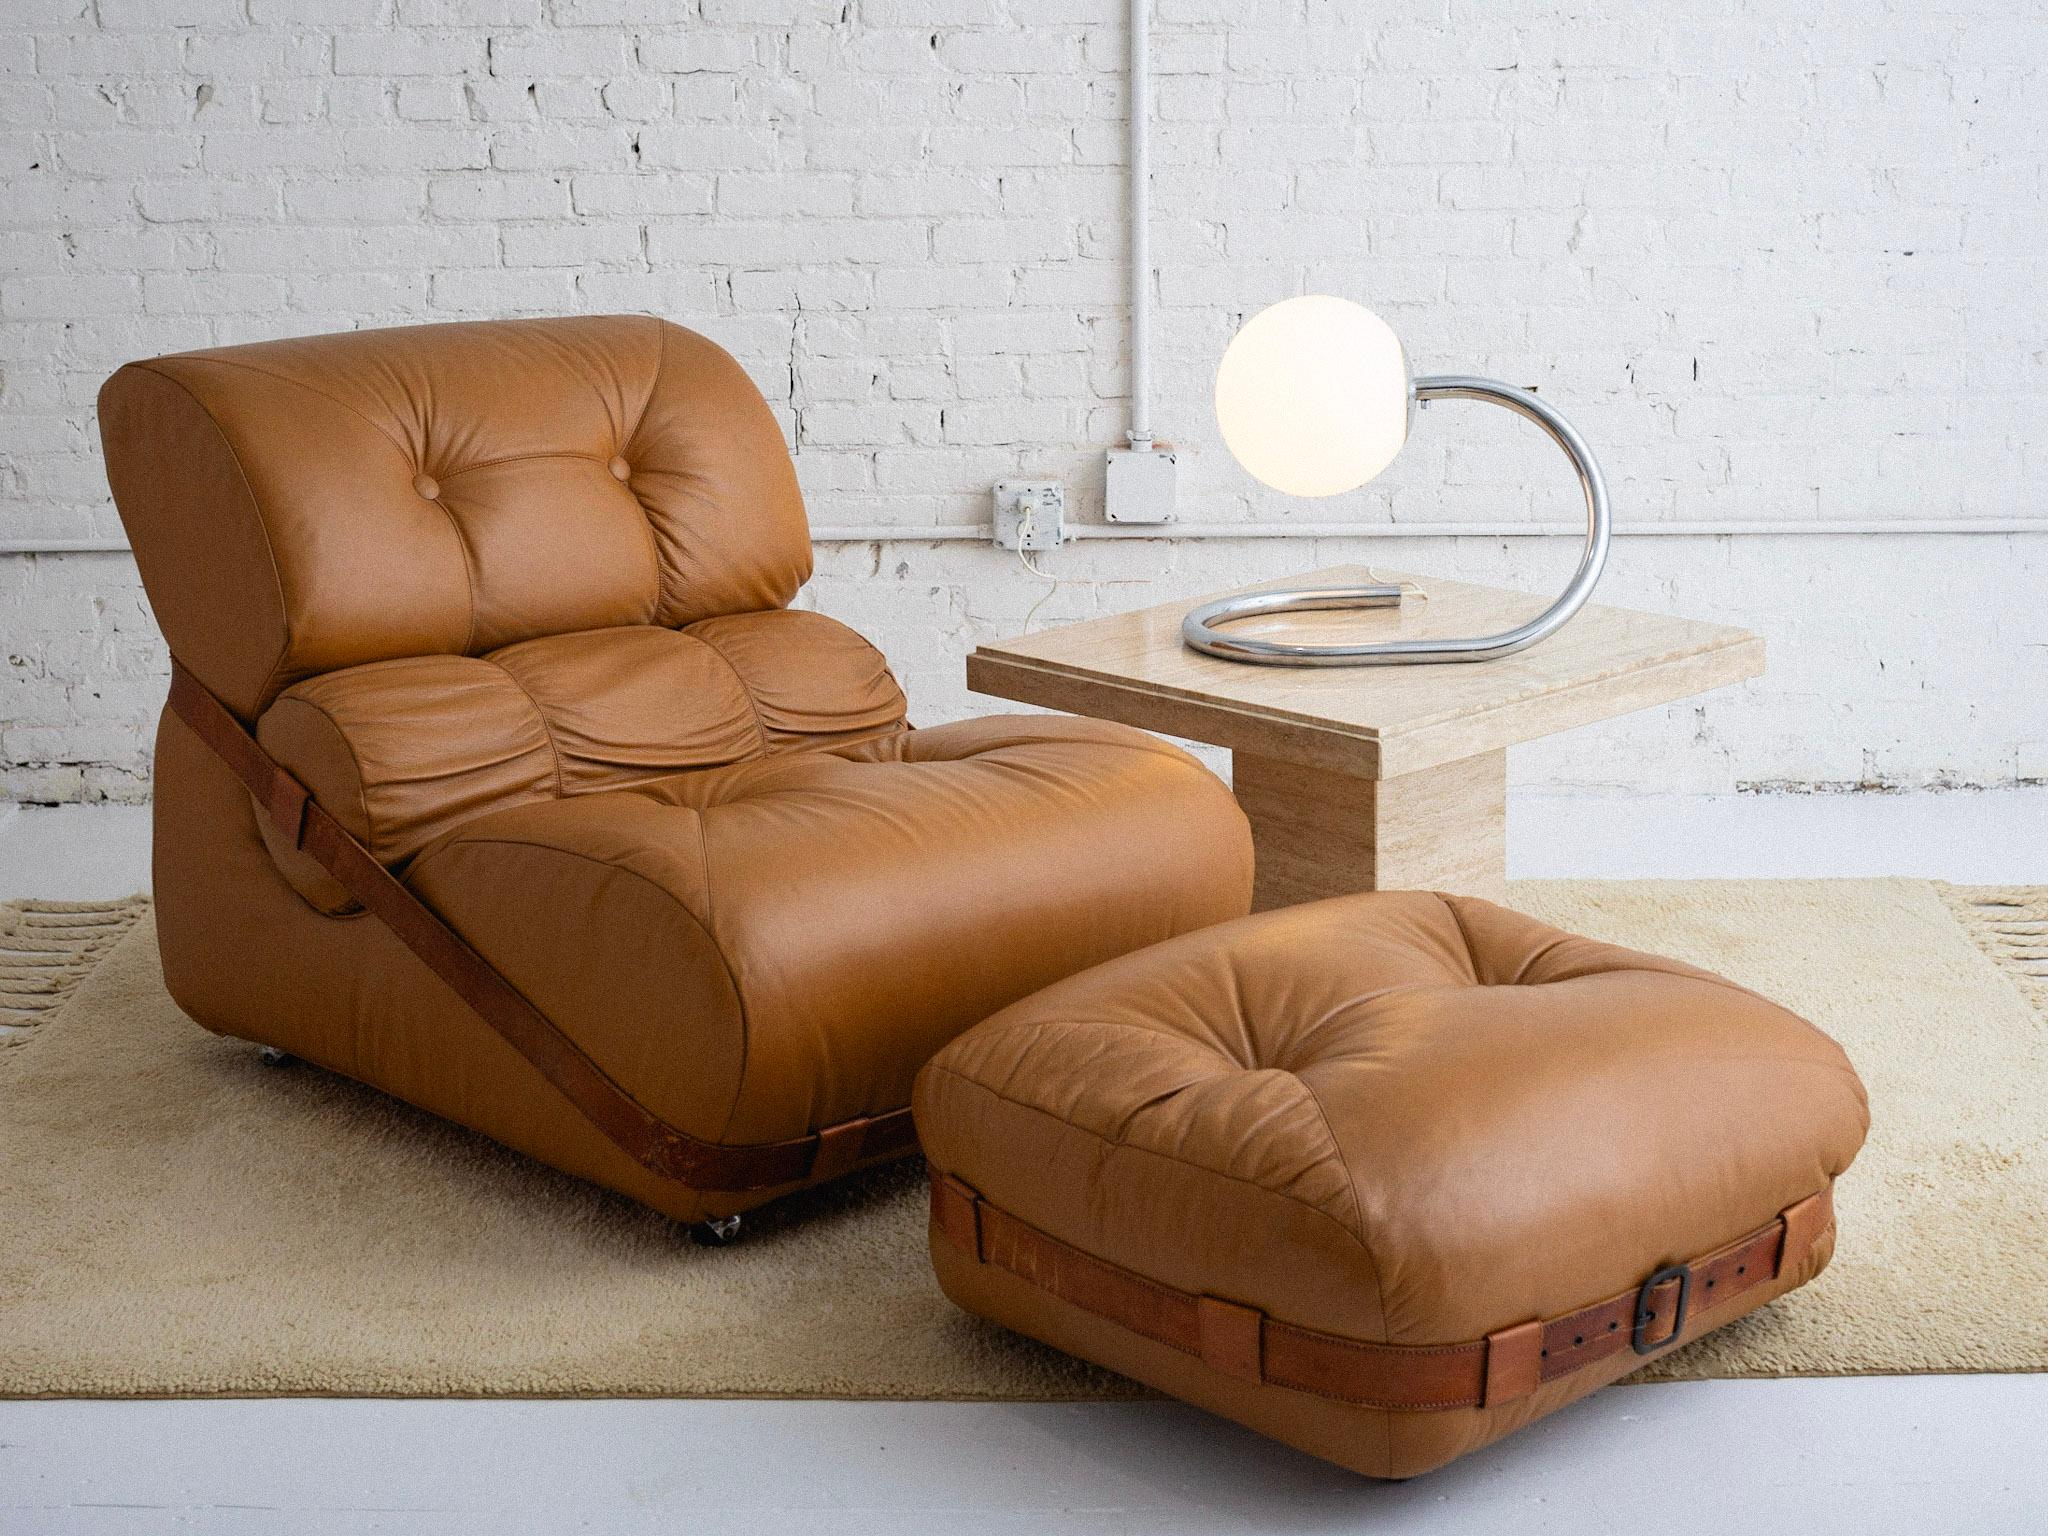 An overstuffed leather chair and ottoman in the style of De Pas, D'Urbino & Lomazzi. Camel leather chair features a back bolster with surrounding leather belt strap. Matching ottoman also features a surrounding belt. Both pieces are on castors.